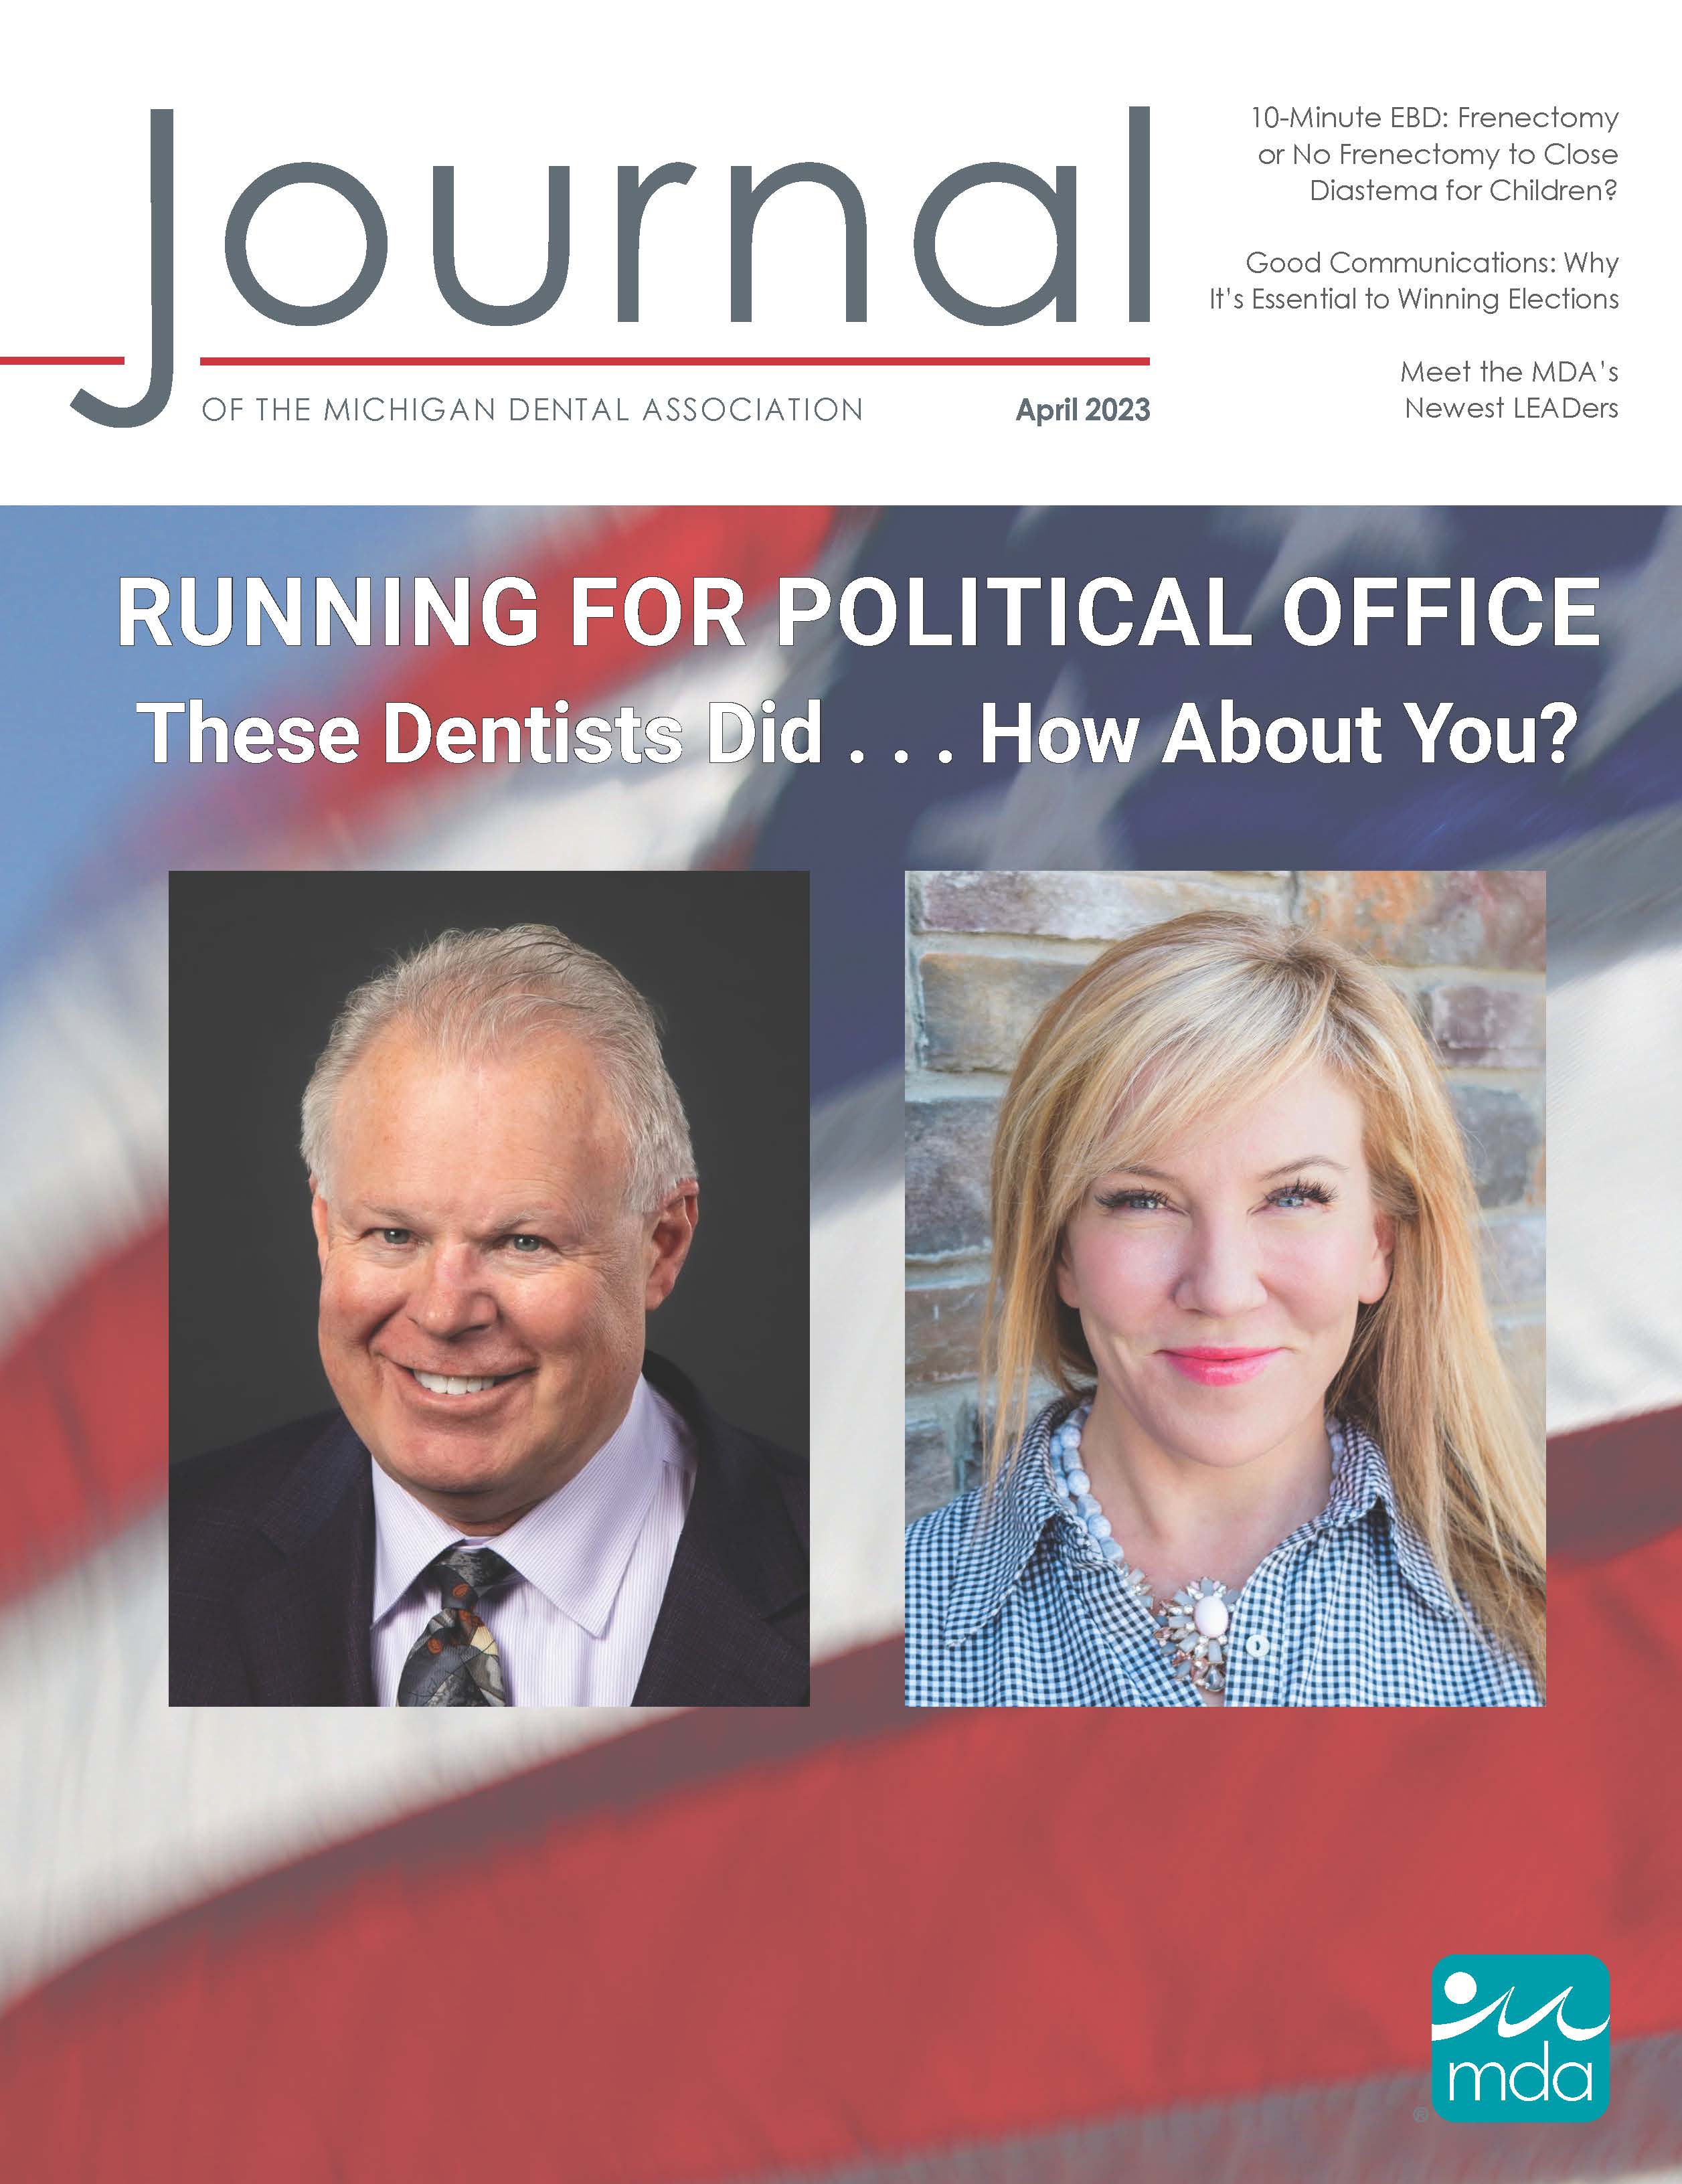 Cover of the Journal of the Michigan Dental Association with two headshots on an out of focus American flag background. One headshot is of a man, Iowa state Representative Steven Bradley, and the other is of a woman, Montana state Representative Jane Gillette. There is text above the photos that says Running for political office These dentists did...How about you?